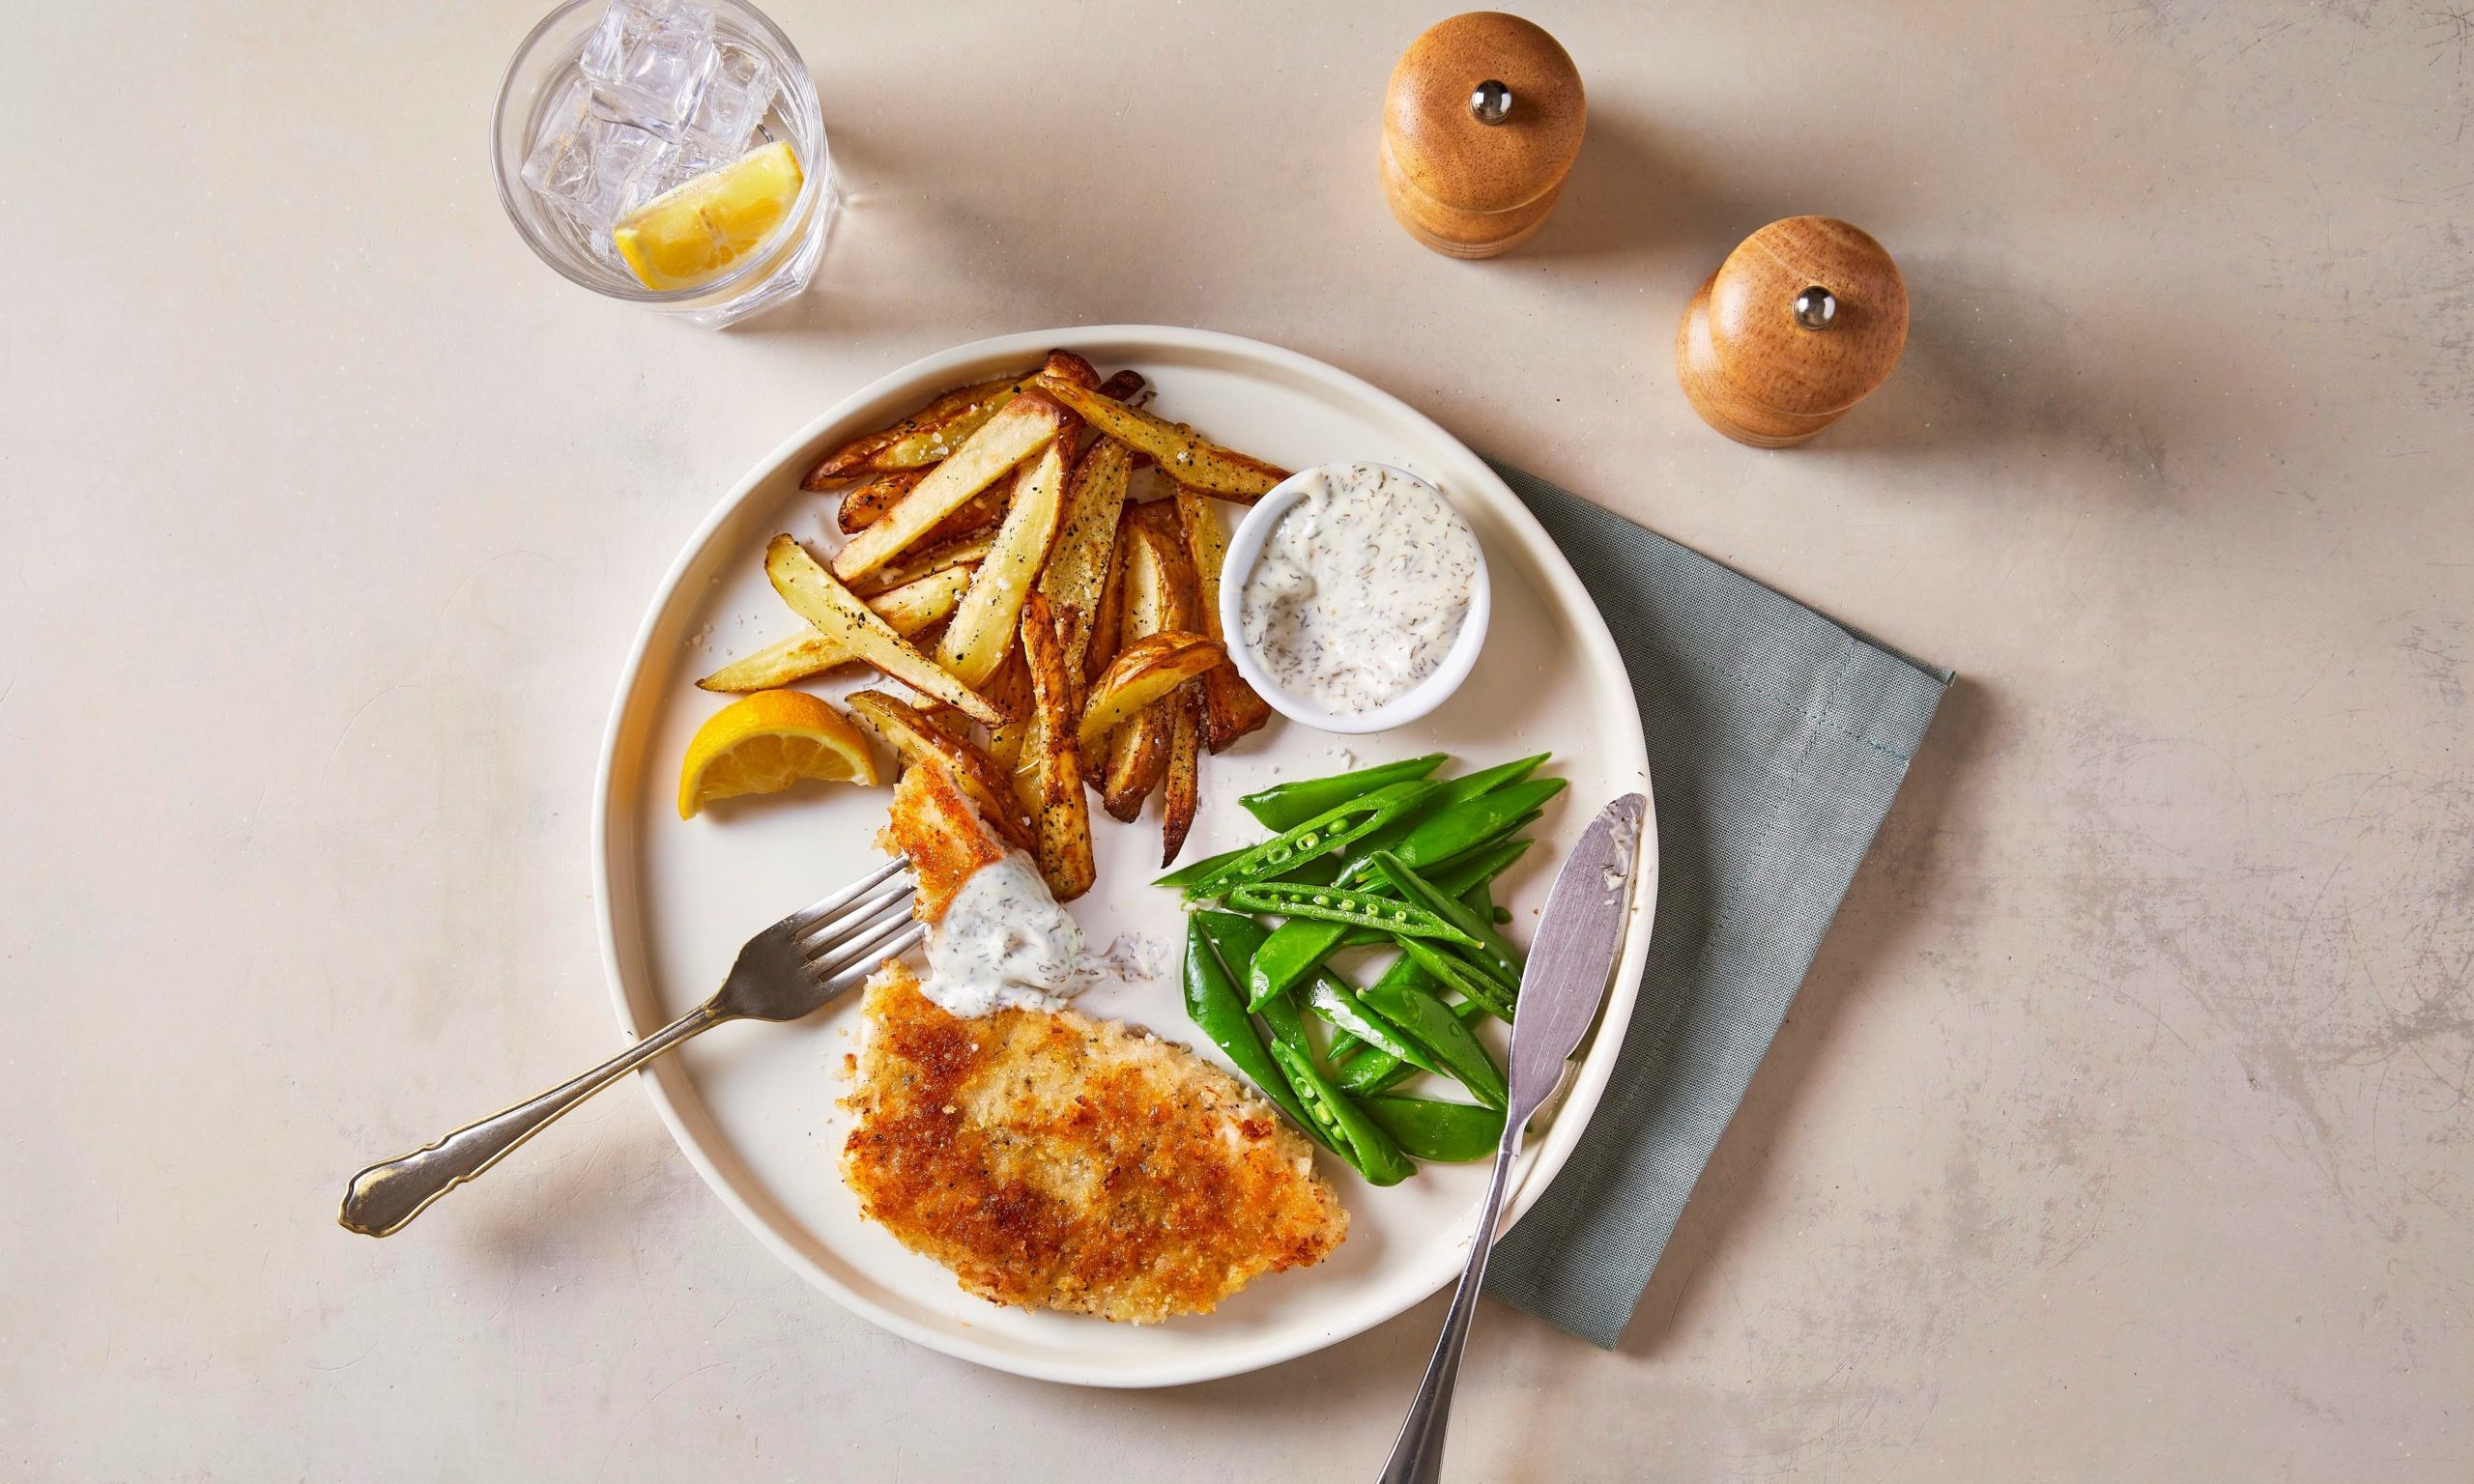 Make your own crispy fish and chips.